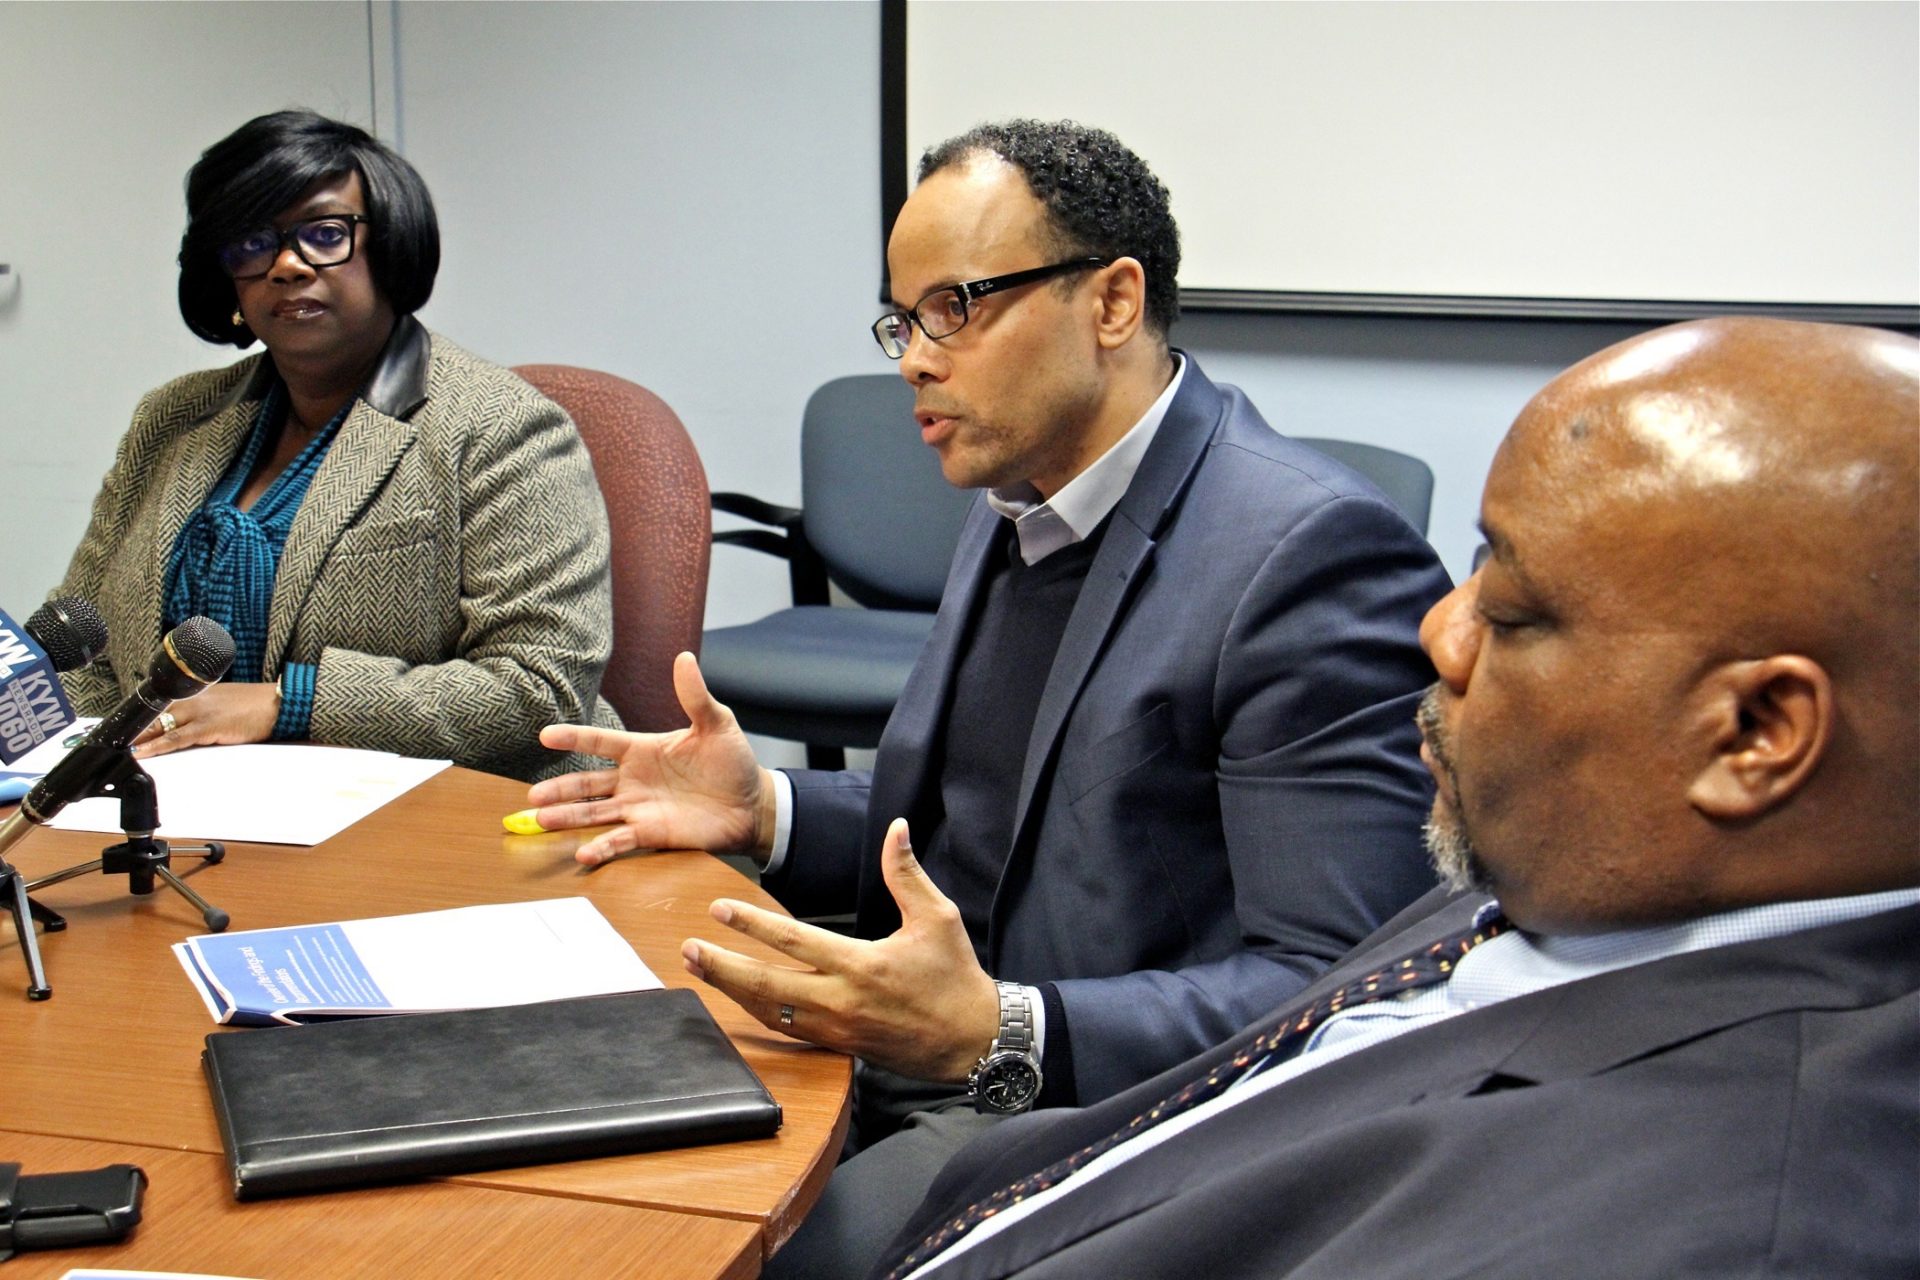 Theron Pride (center), who leads the city’s Office of Violence Prevention, talks about enhancing violence prevention programs in Philadelphia during a press briefing on Dec. 17, 2018. He is joined by Deputy Managing Director Vanessa Garrett Harley (left) and Shondell Revell of the Office of Violence Prevention.